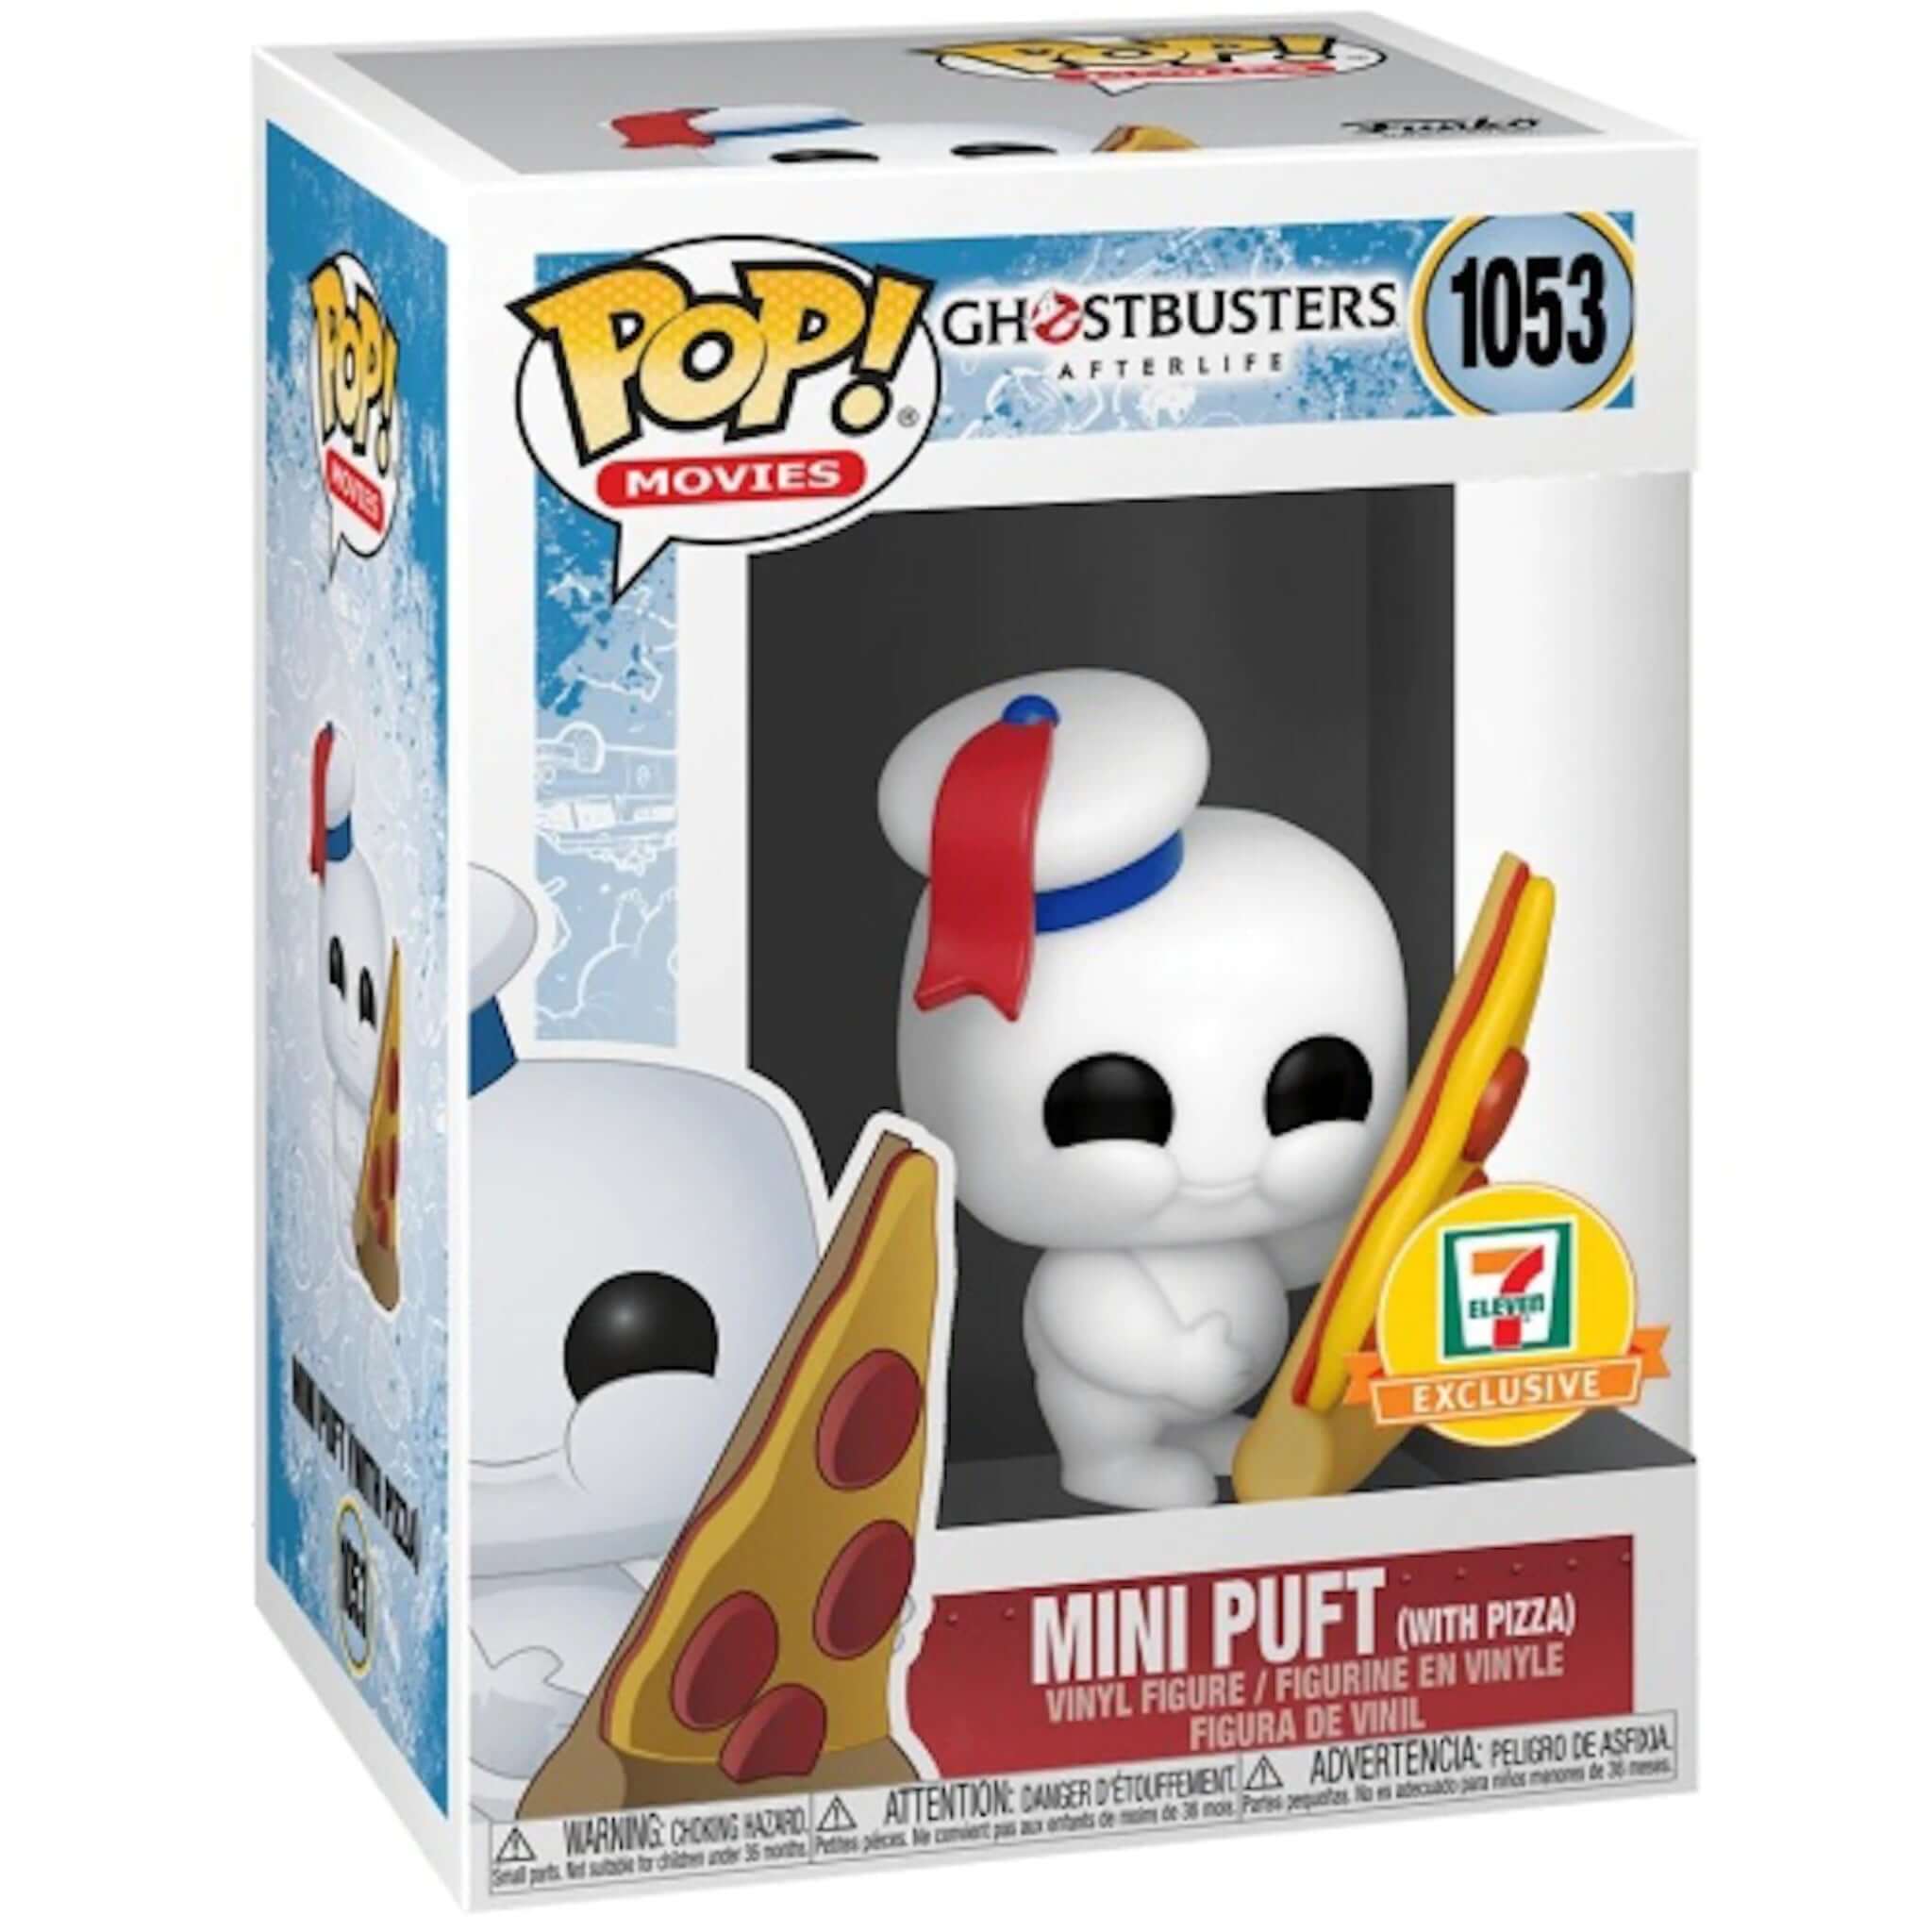 Mini Puft with Pizza 7-Eleven Exclusive A Tasty Twist on Ghosts